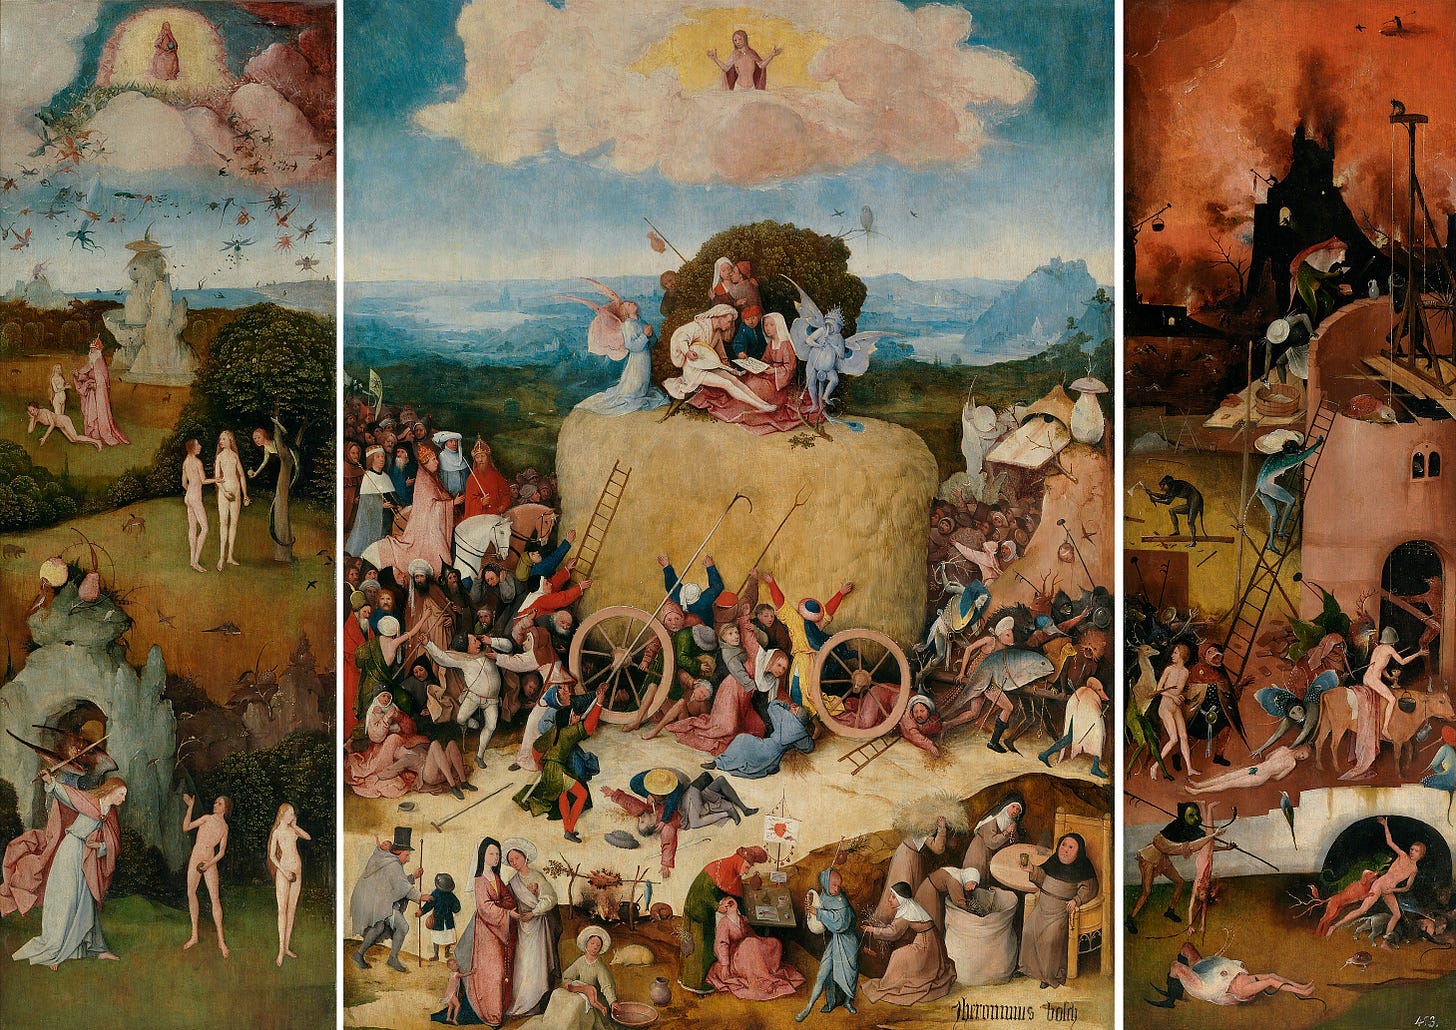 A tryptich by Jheronimus Bosch, three panels depicting various biblical stories